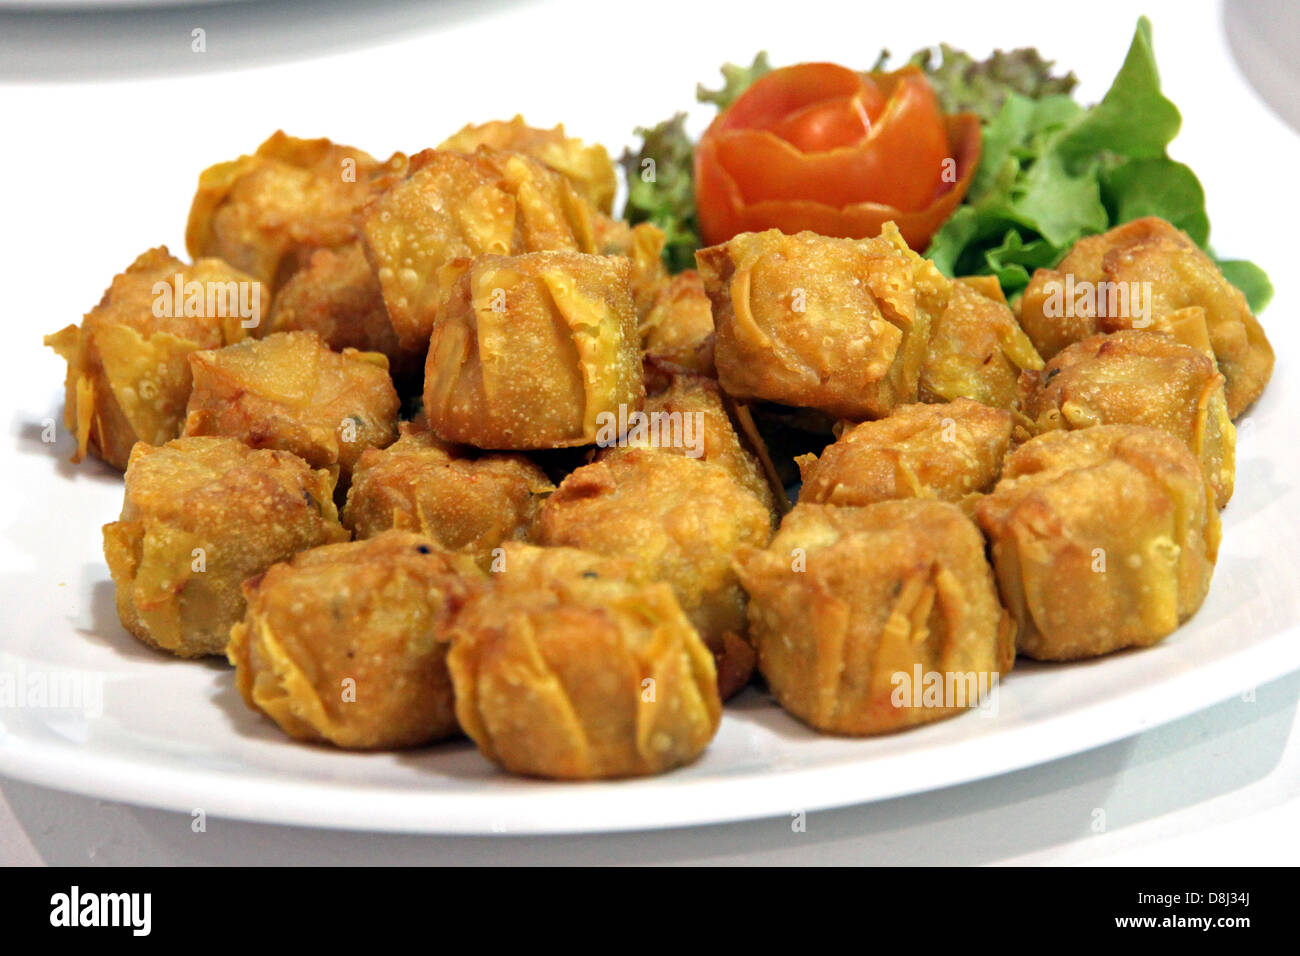 Fried Meatball of the Asians foods. Stock Photo